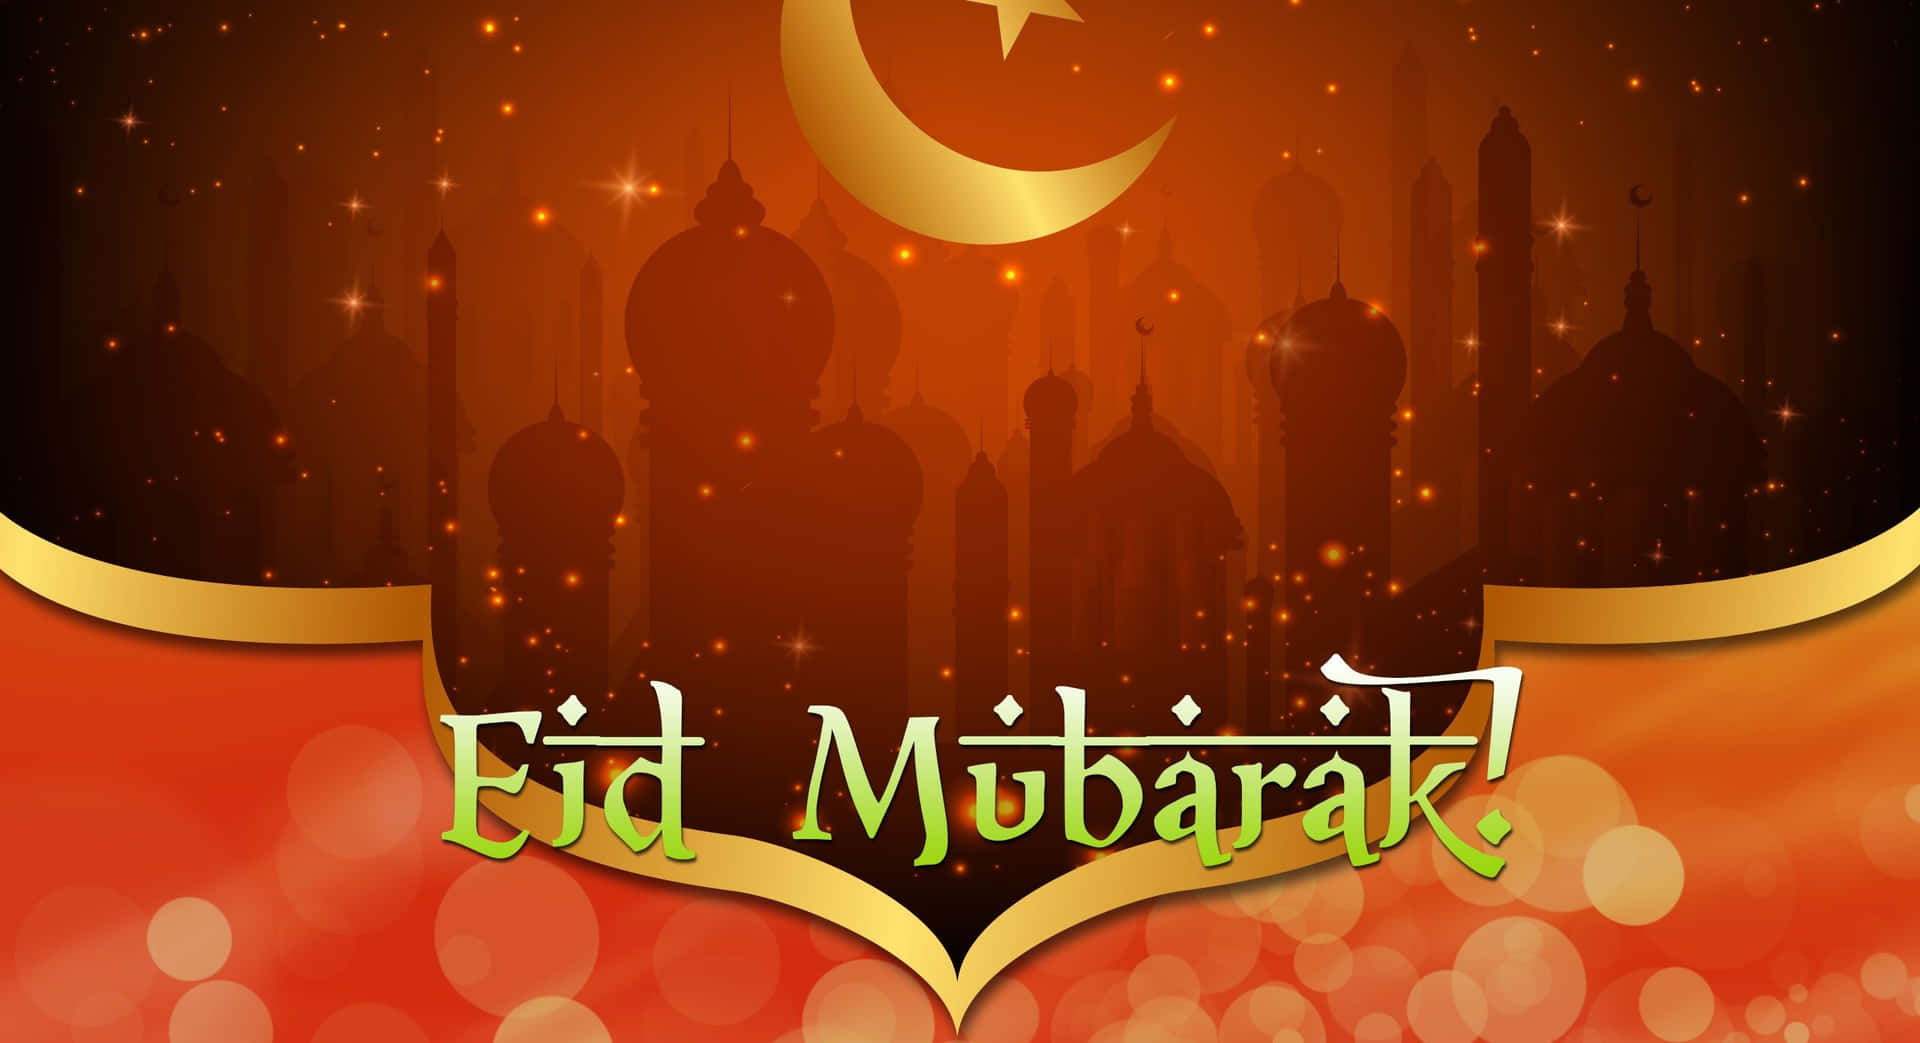 Eid Mubarak Wallpapers And Images